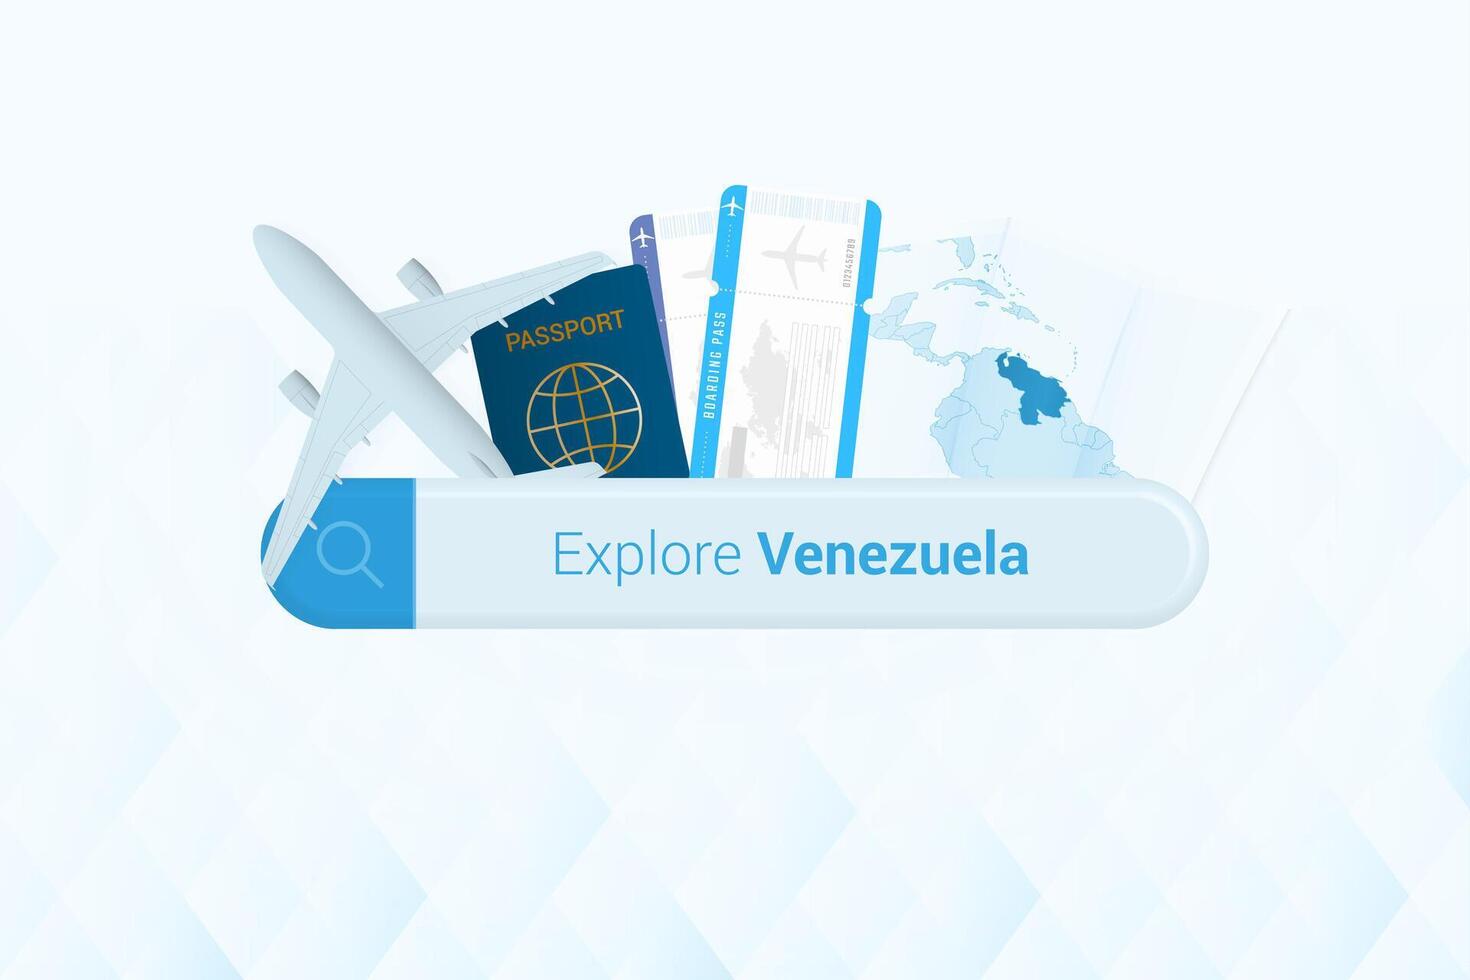 Searching tickets to Venezuela or travel destination in Venezuela. Searching bar with airplane, passport, boarding pass, tickets and map. vector